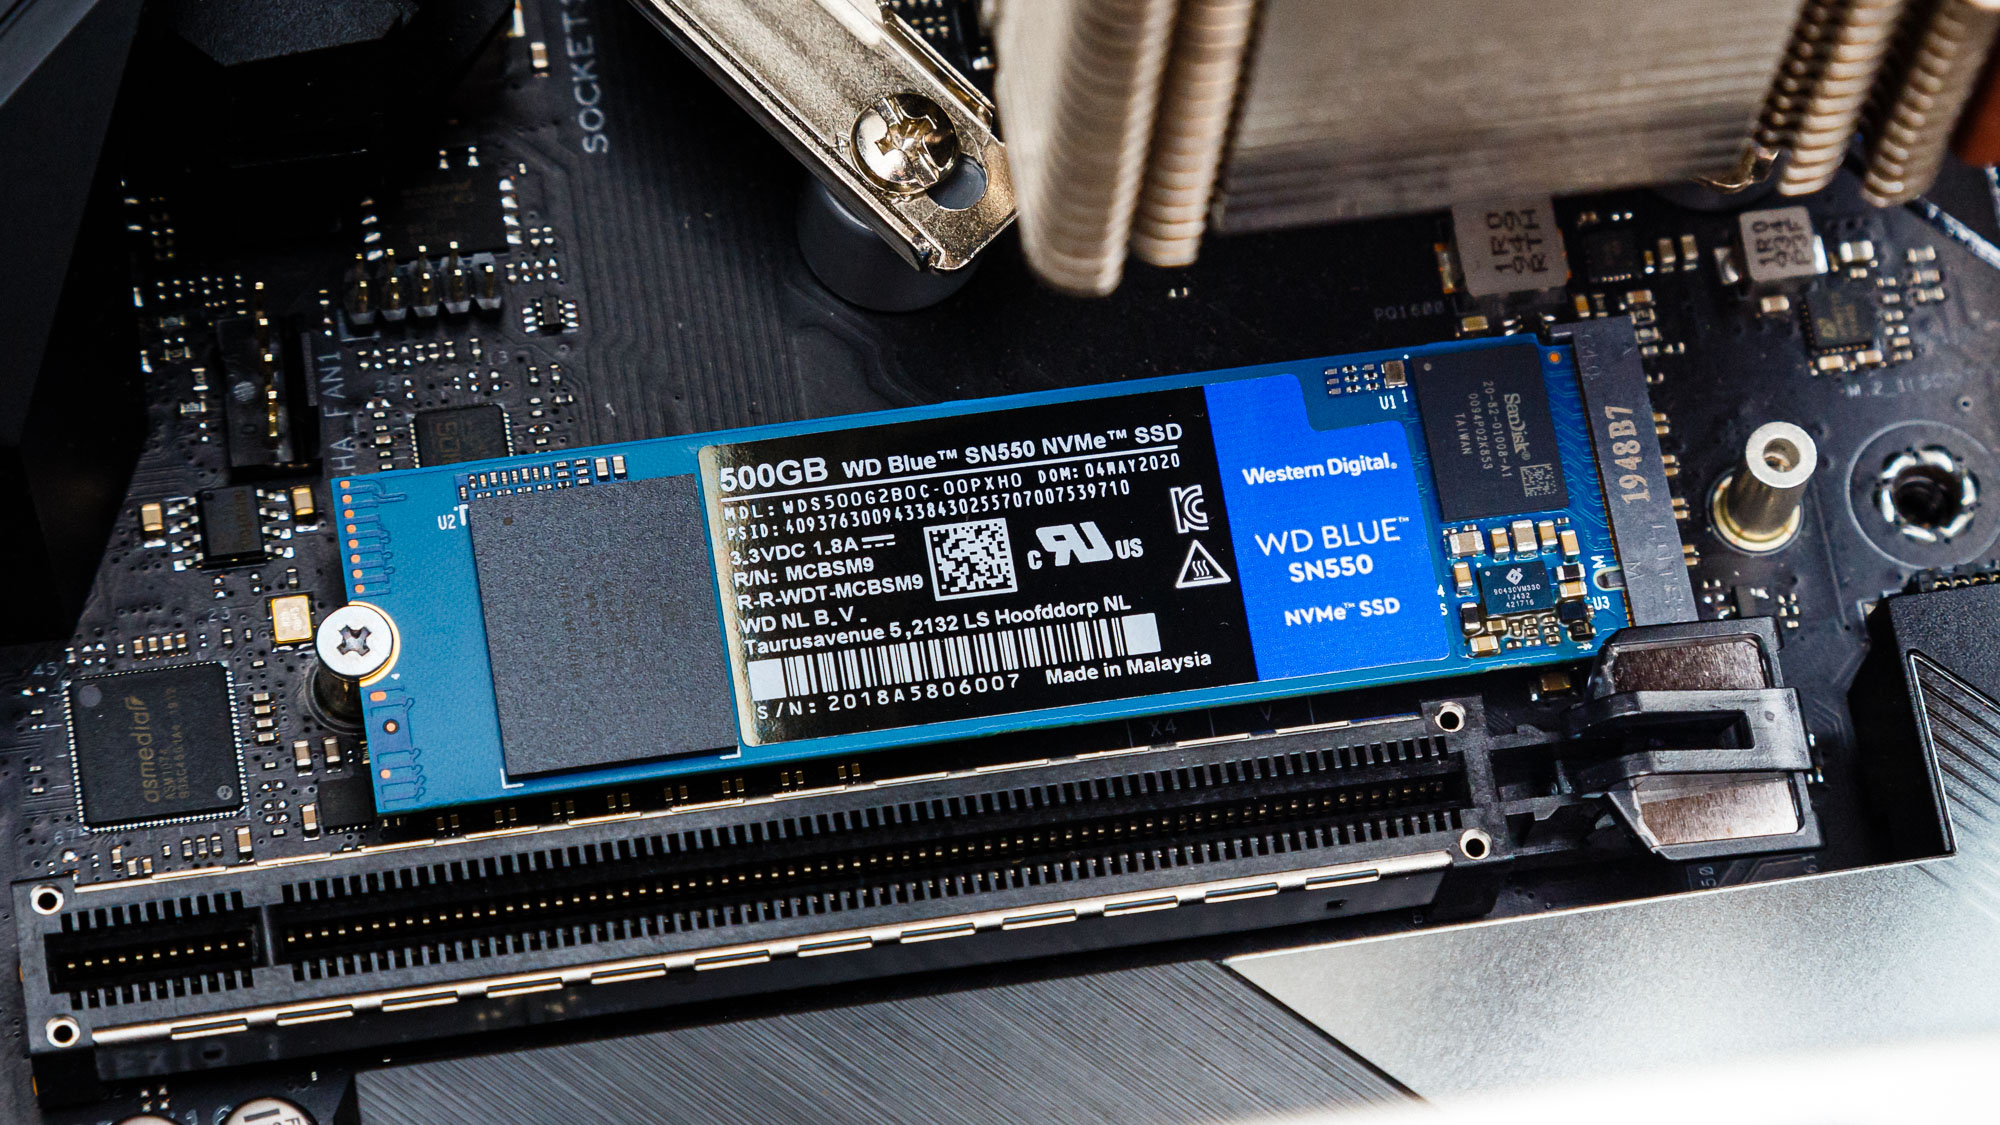 500GB Performance Results - WD Blue SN550 M.2 NVMe SSD Review: The 